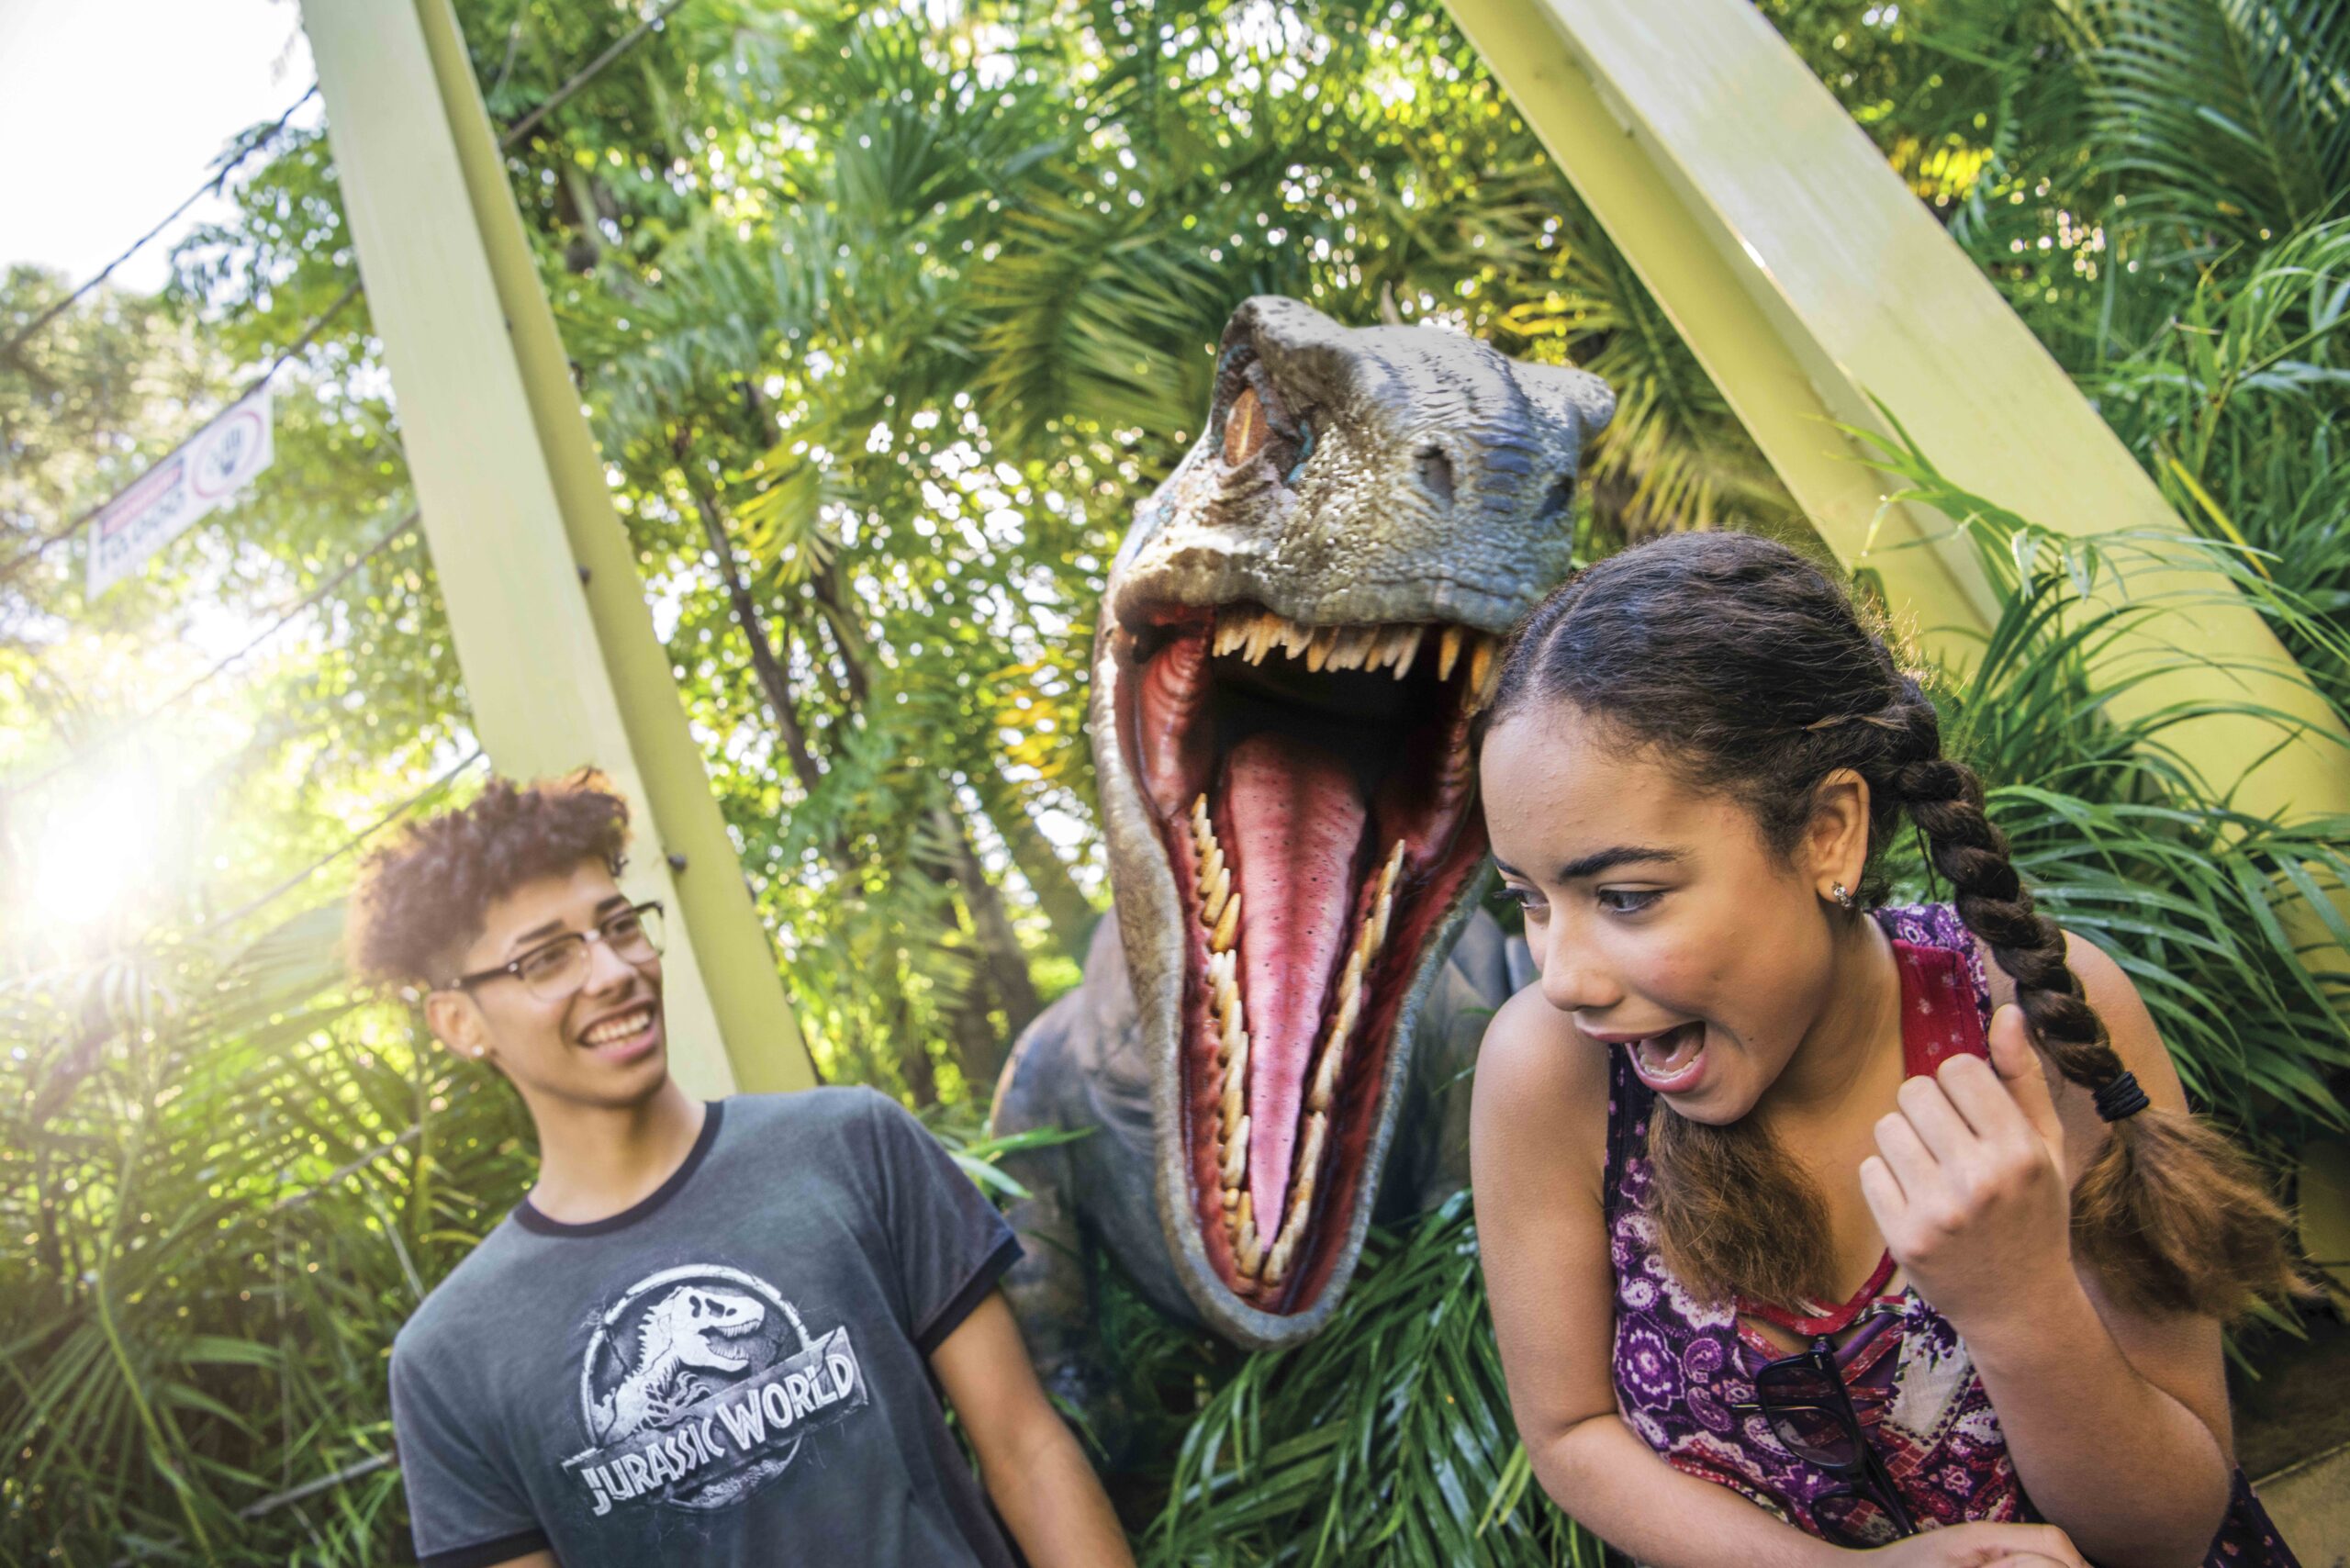 Exclusive 2023 & 2024 Deals: Save Big on Cheap Universal Orlando Tickets -  Unbeatable Universal Ticket Discounts Only at The Park Prodigy